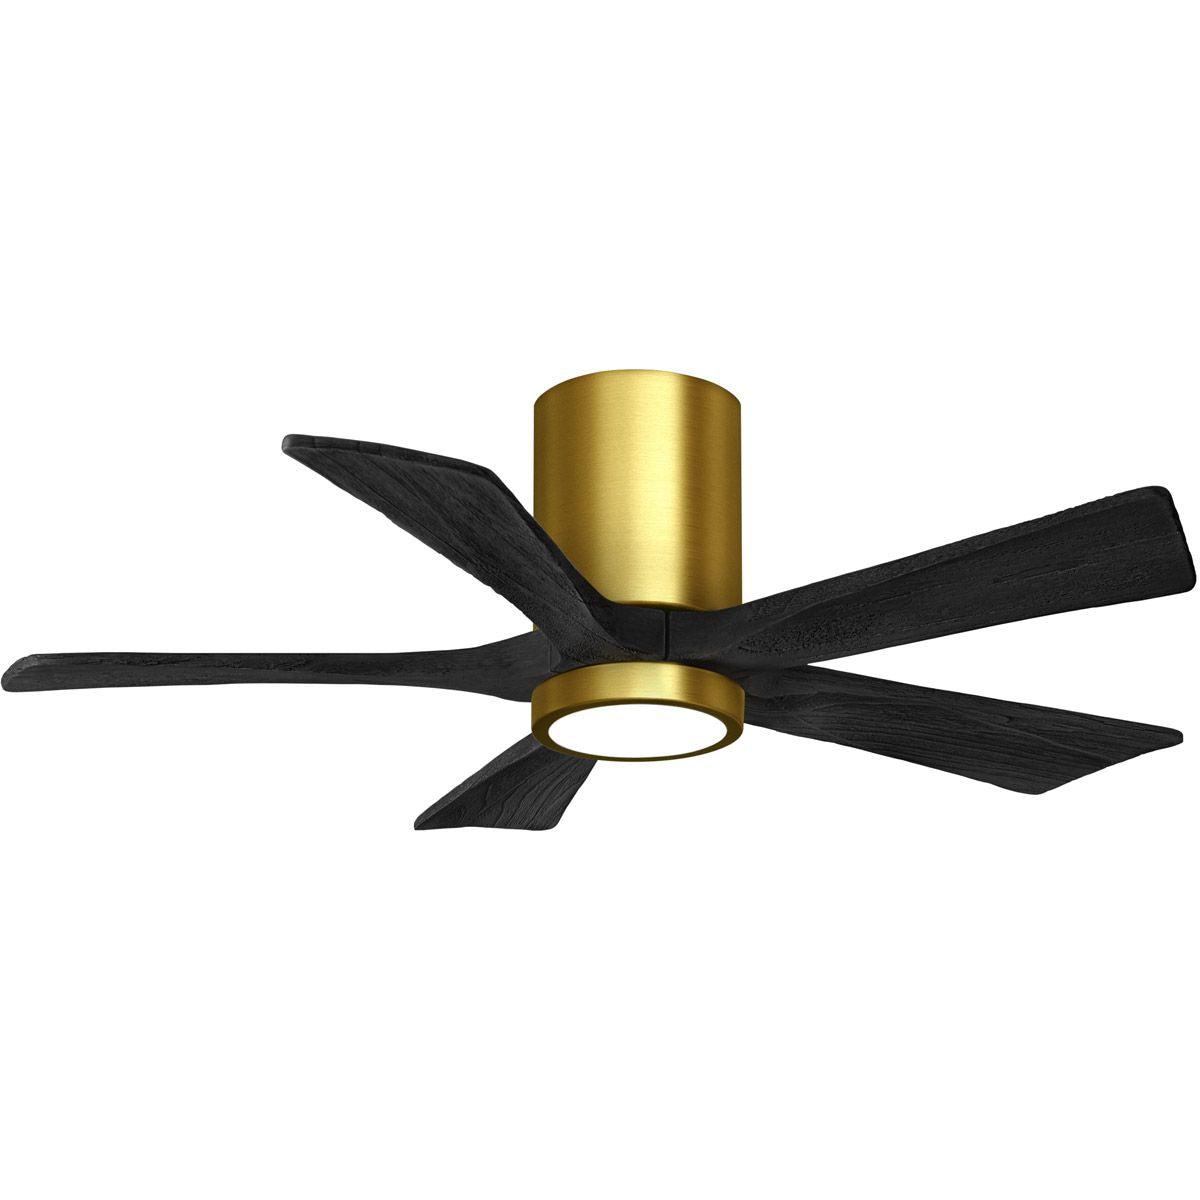 Irene 42 Inch Modern Outdoor Ceiling Fan With Light, Wall And Remote Control Included